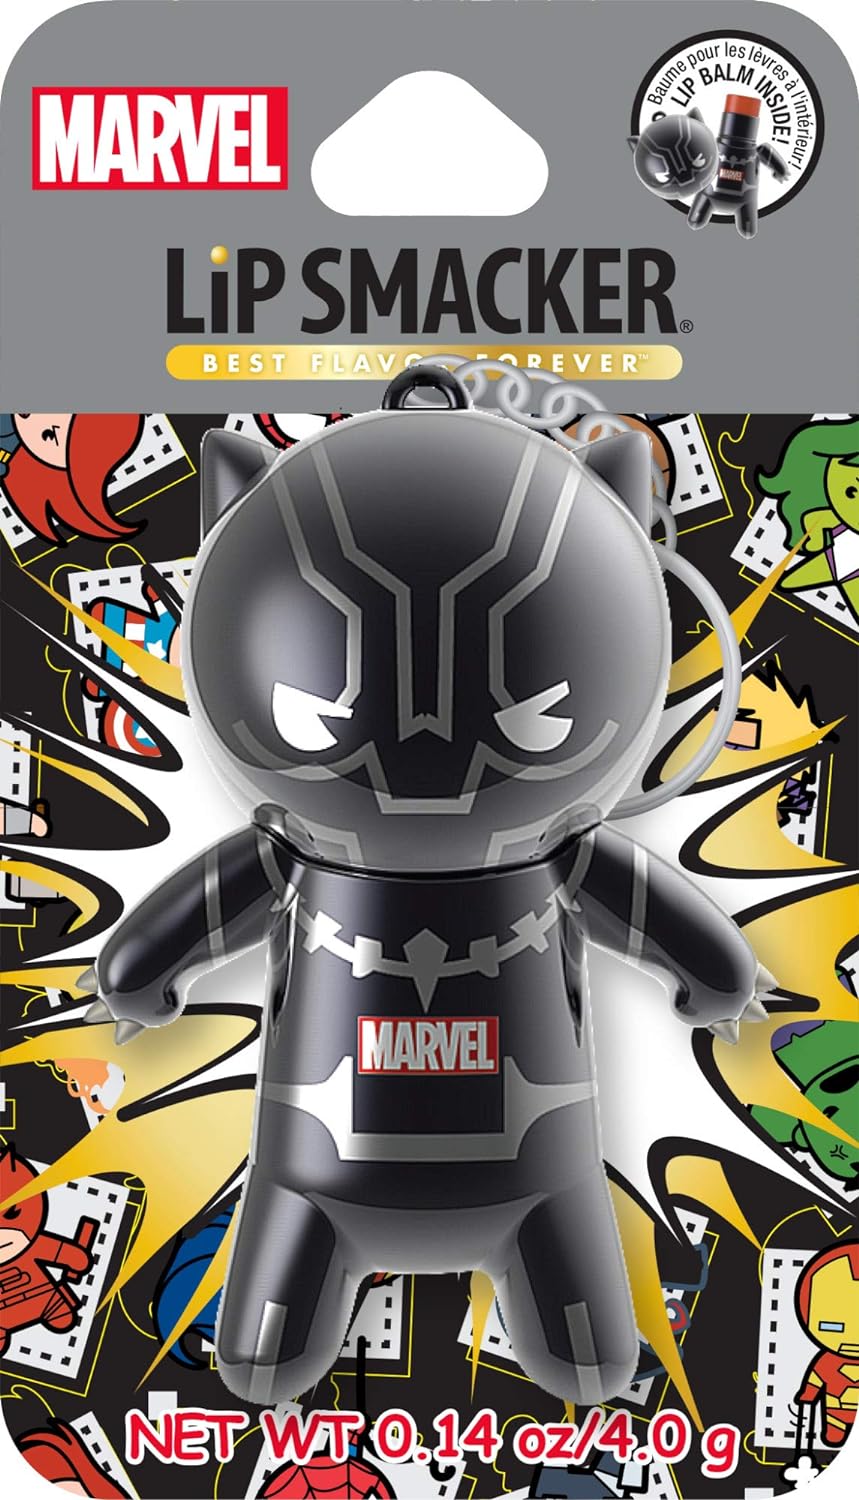 Lip Smacker Marvel, keychain, lip balm for kids - Black Panther : Beauty & Personal Care